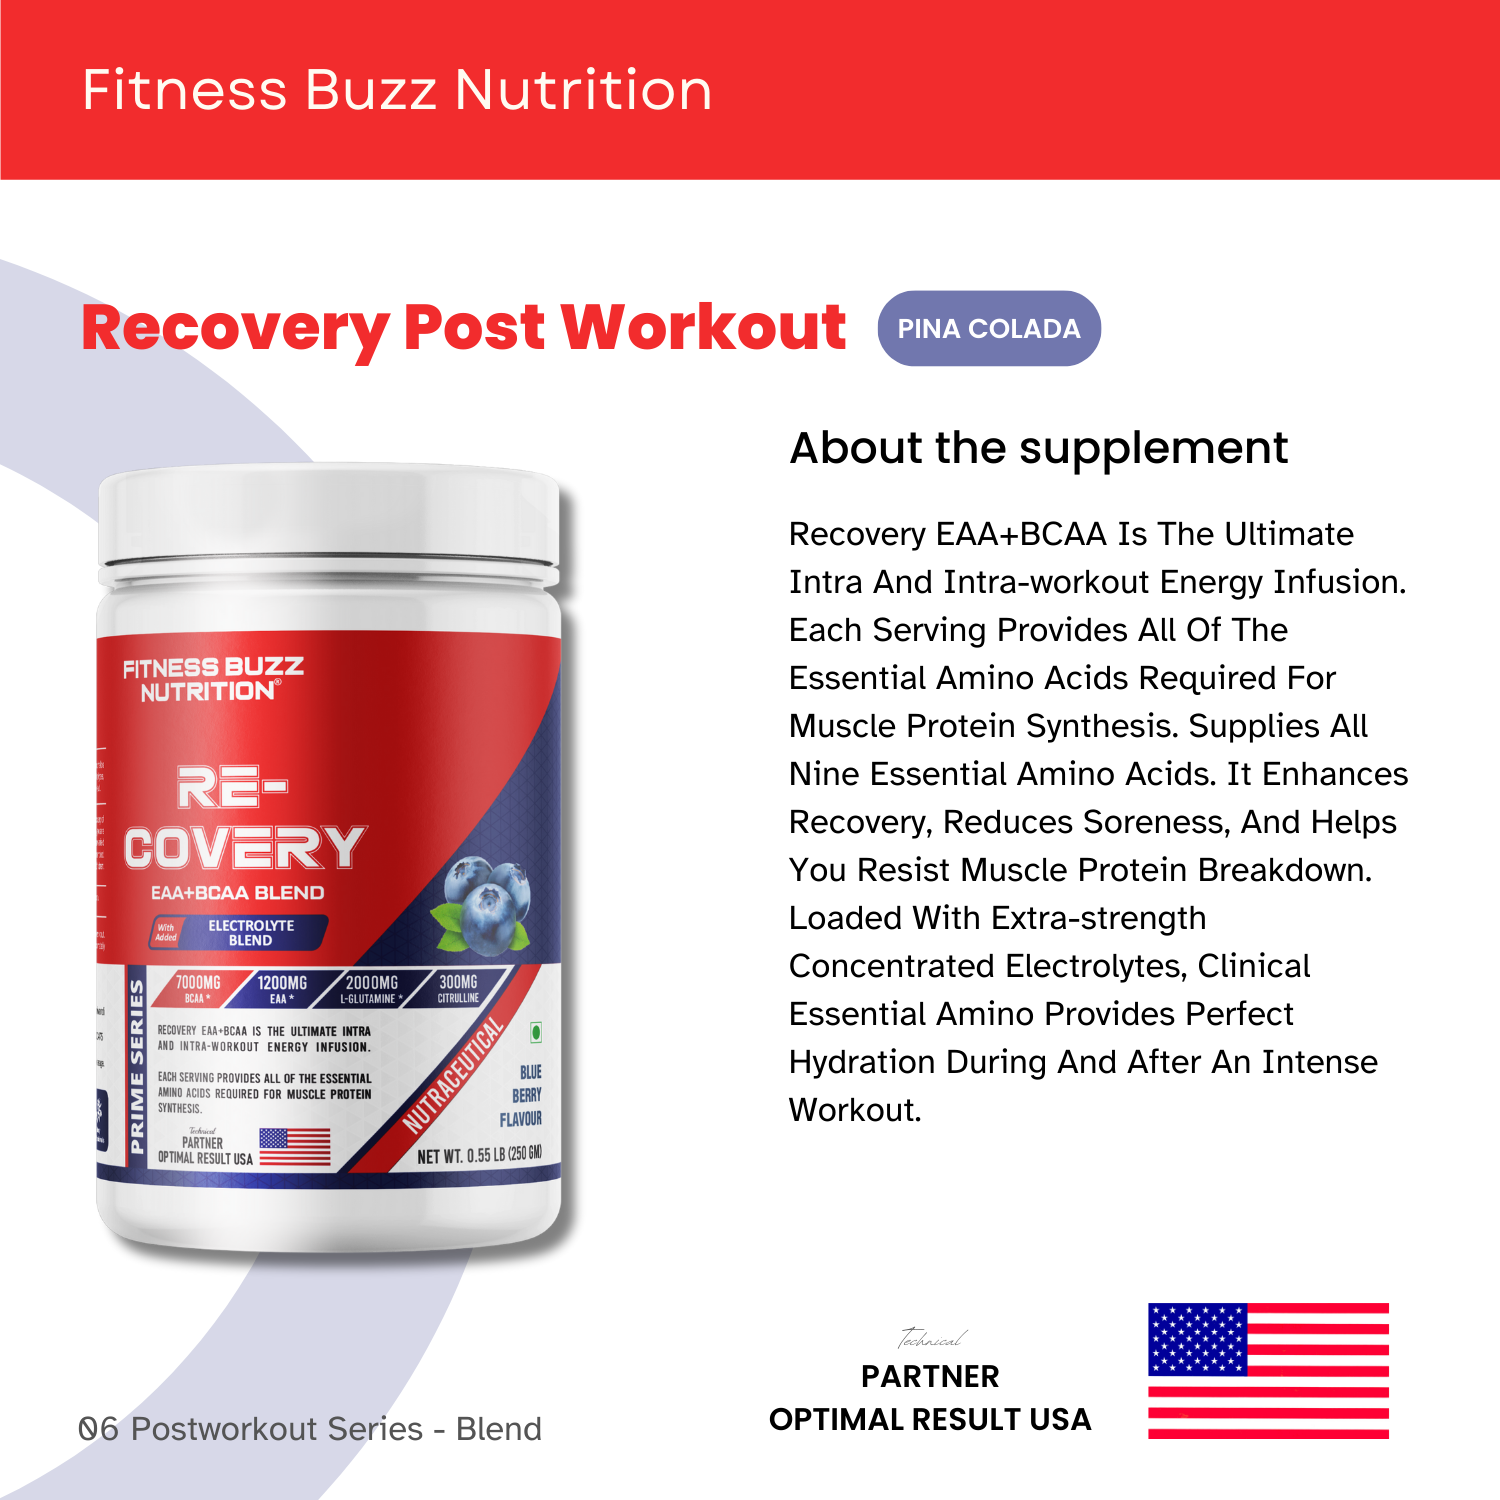 FITNESS BUZZ NUTRITION RE-COVERY (PINA COLADA)